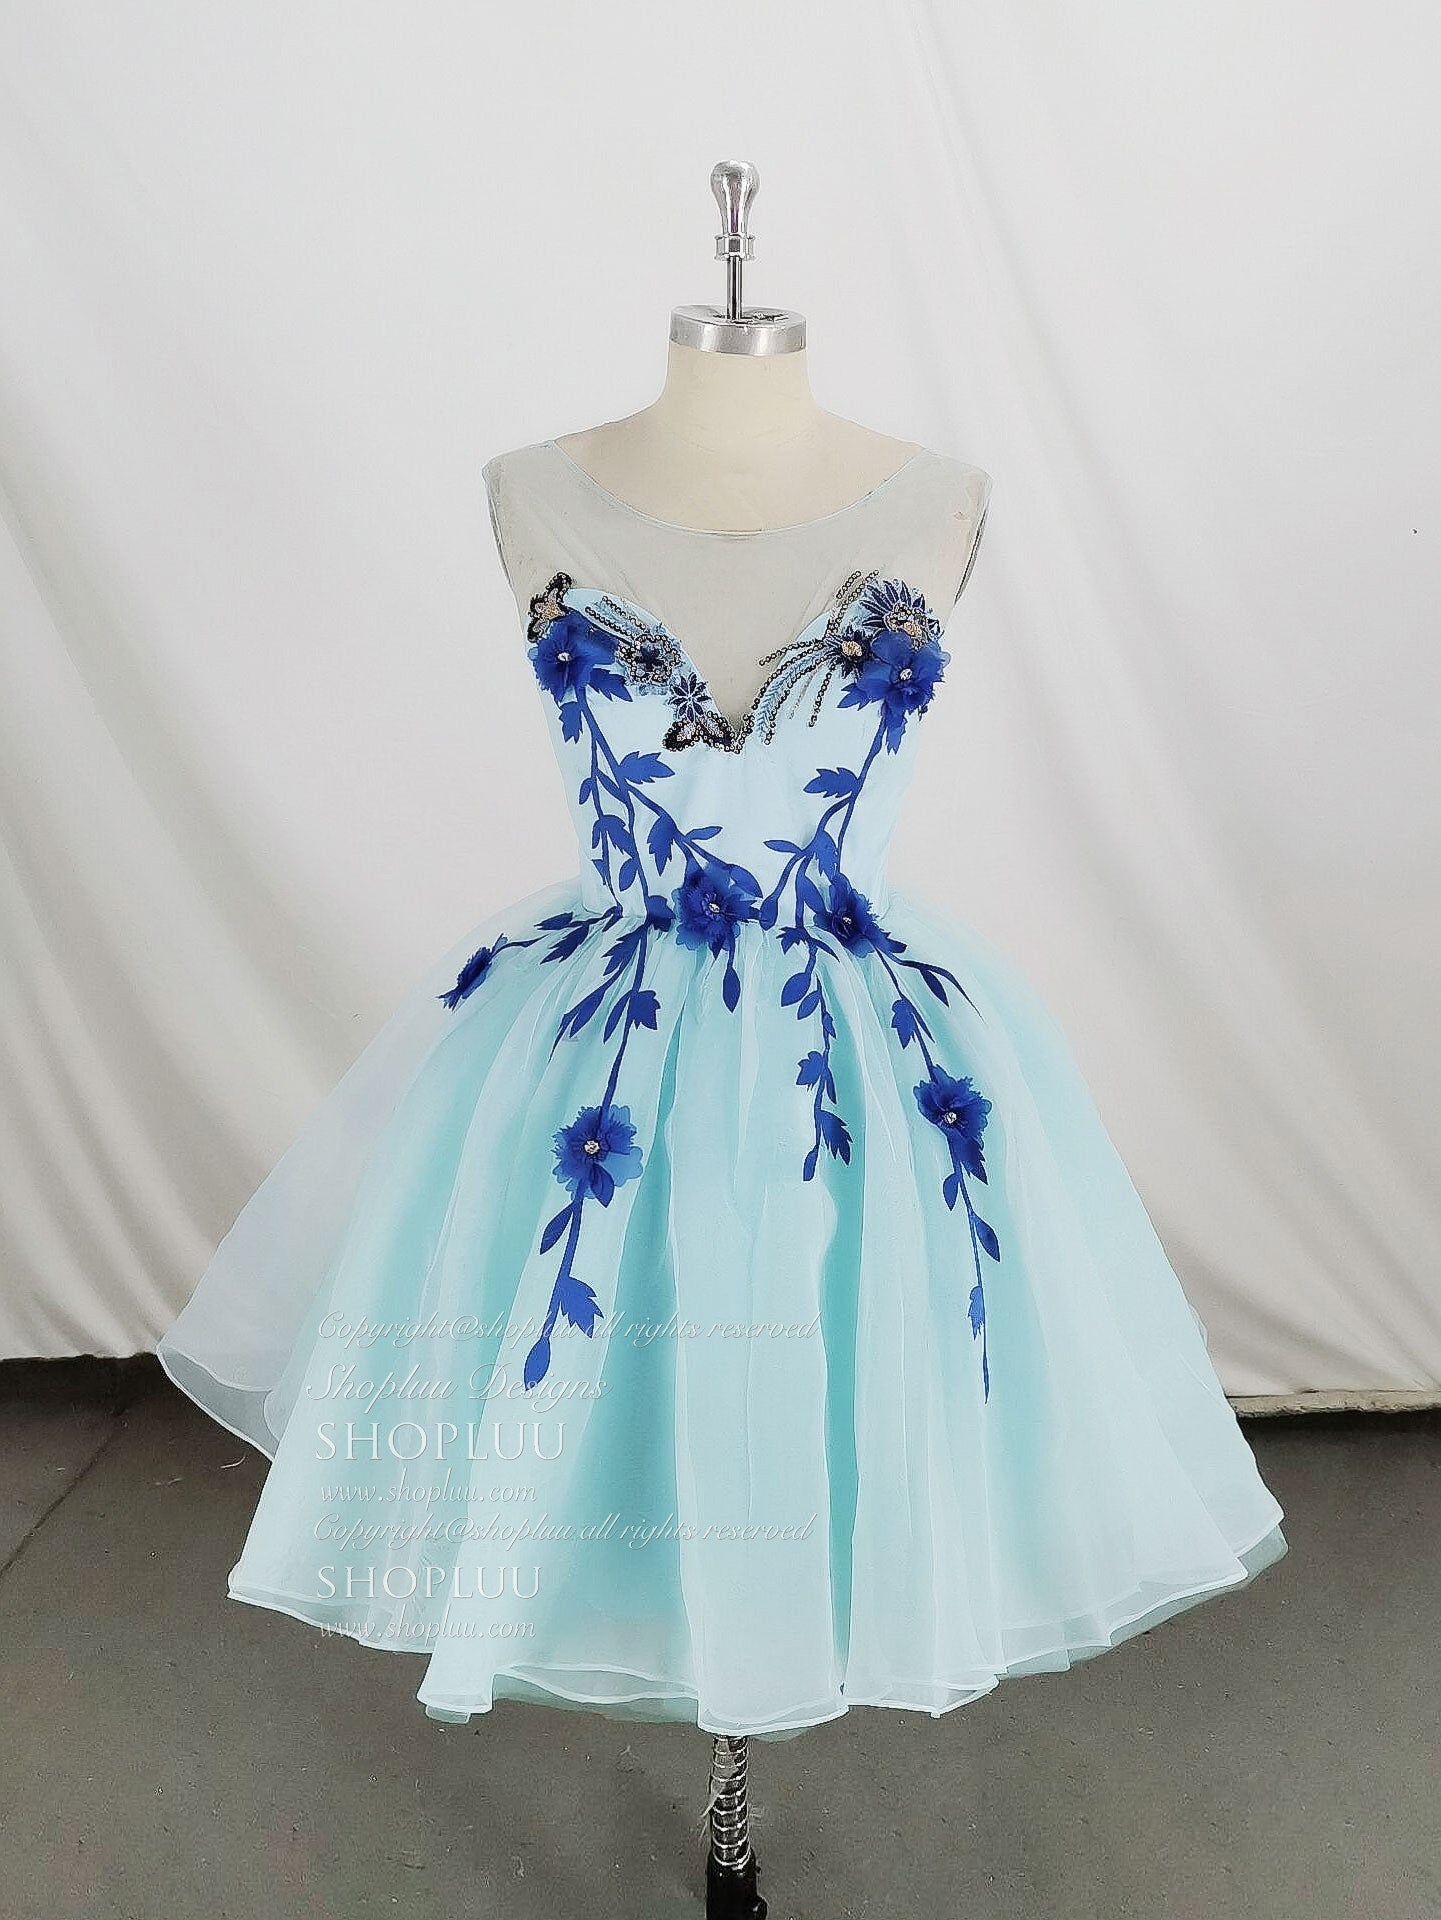 Prom Dress Guide, Cute Round Neck Tulle Lace Short Prom Dress, Blue Homecoming Dress